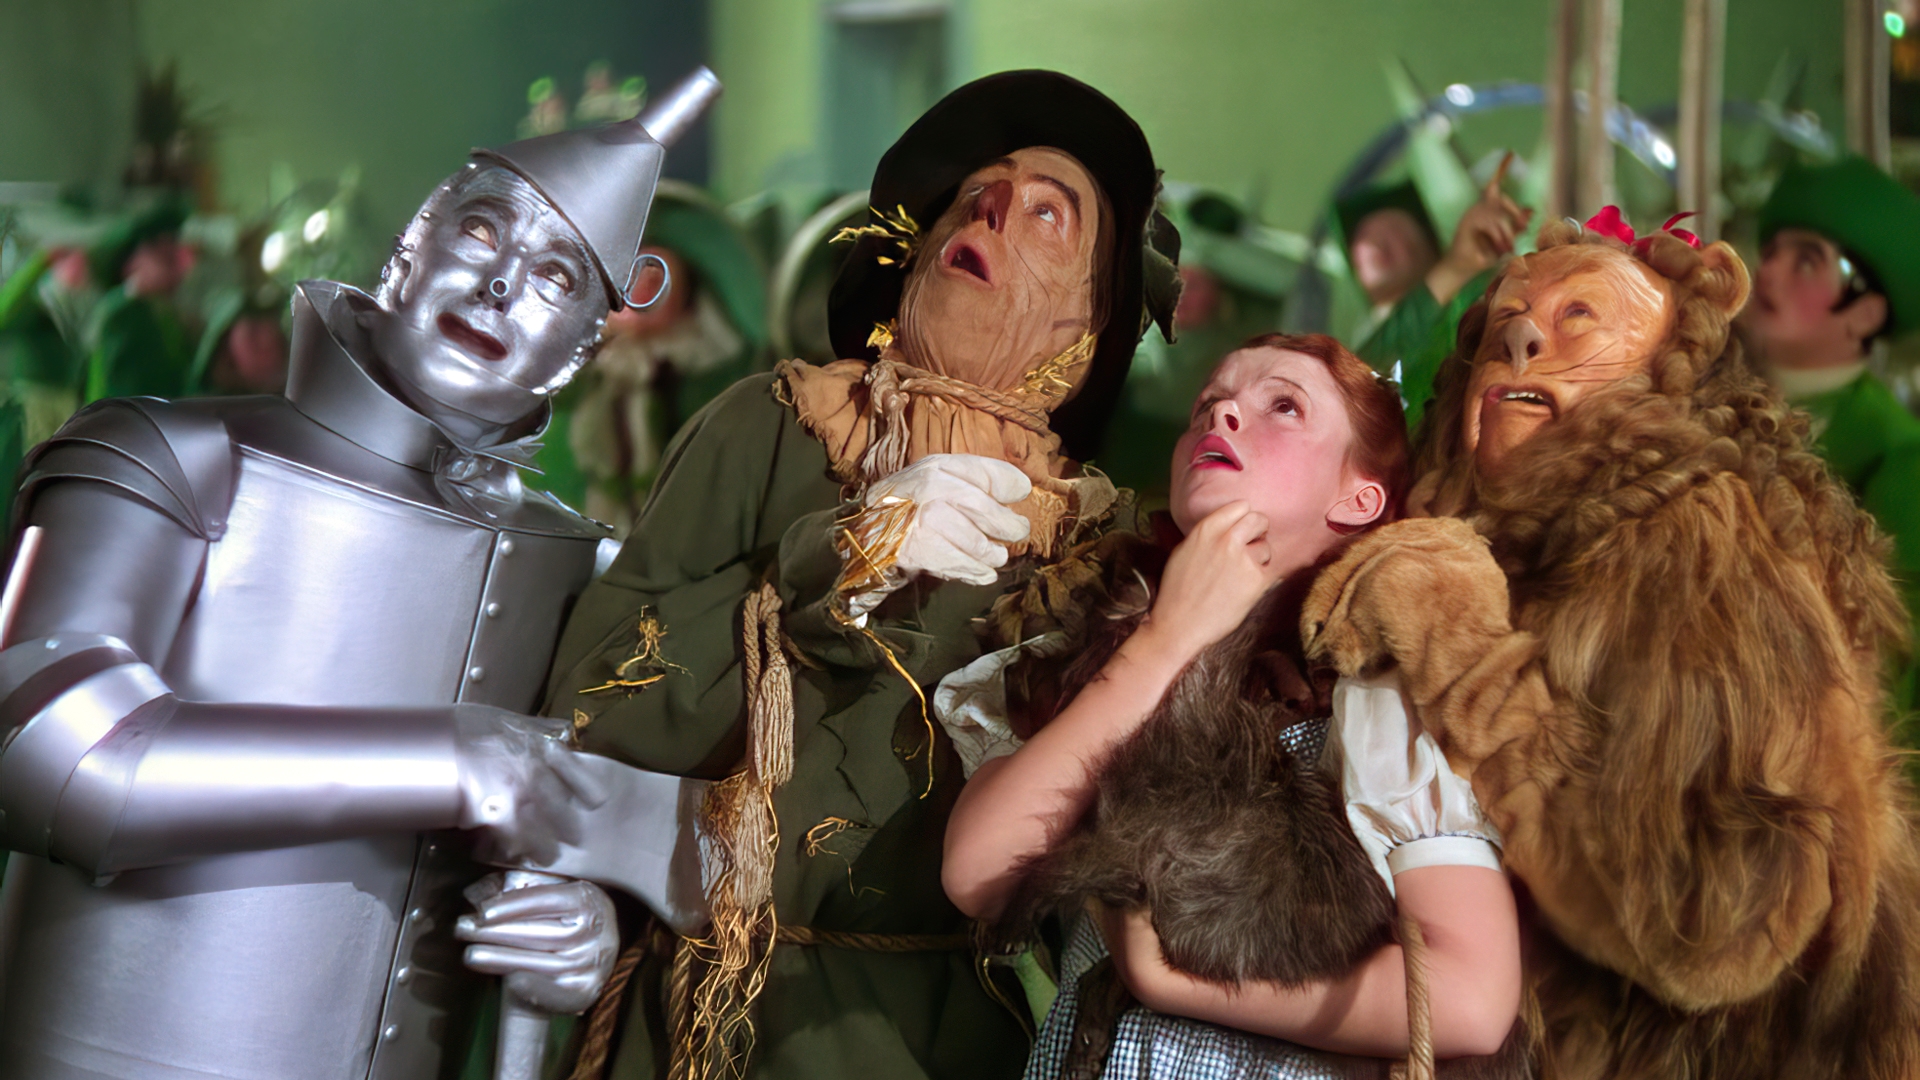 People 1920x1080 The Wizard of Oz movies film stills Dorothy Gale Tin Man Cowardly Lion Scarecrow (character) Toto (dog)